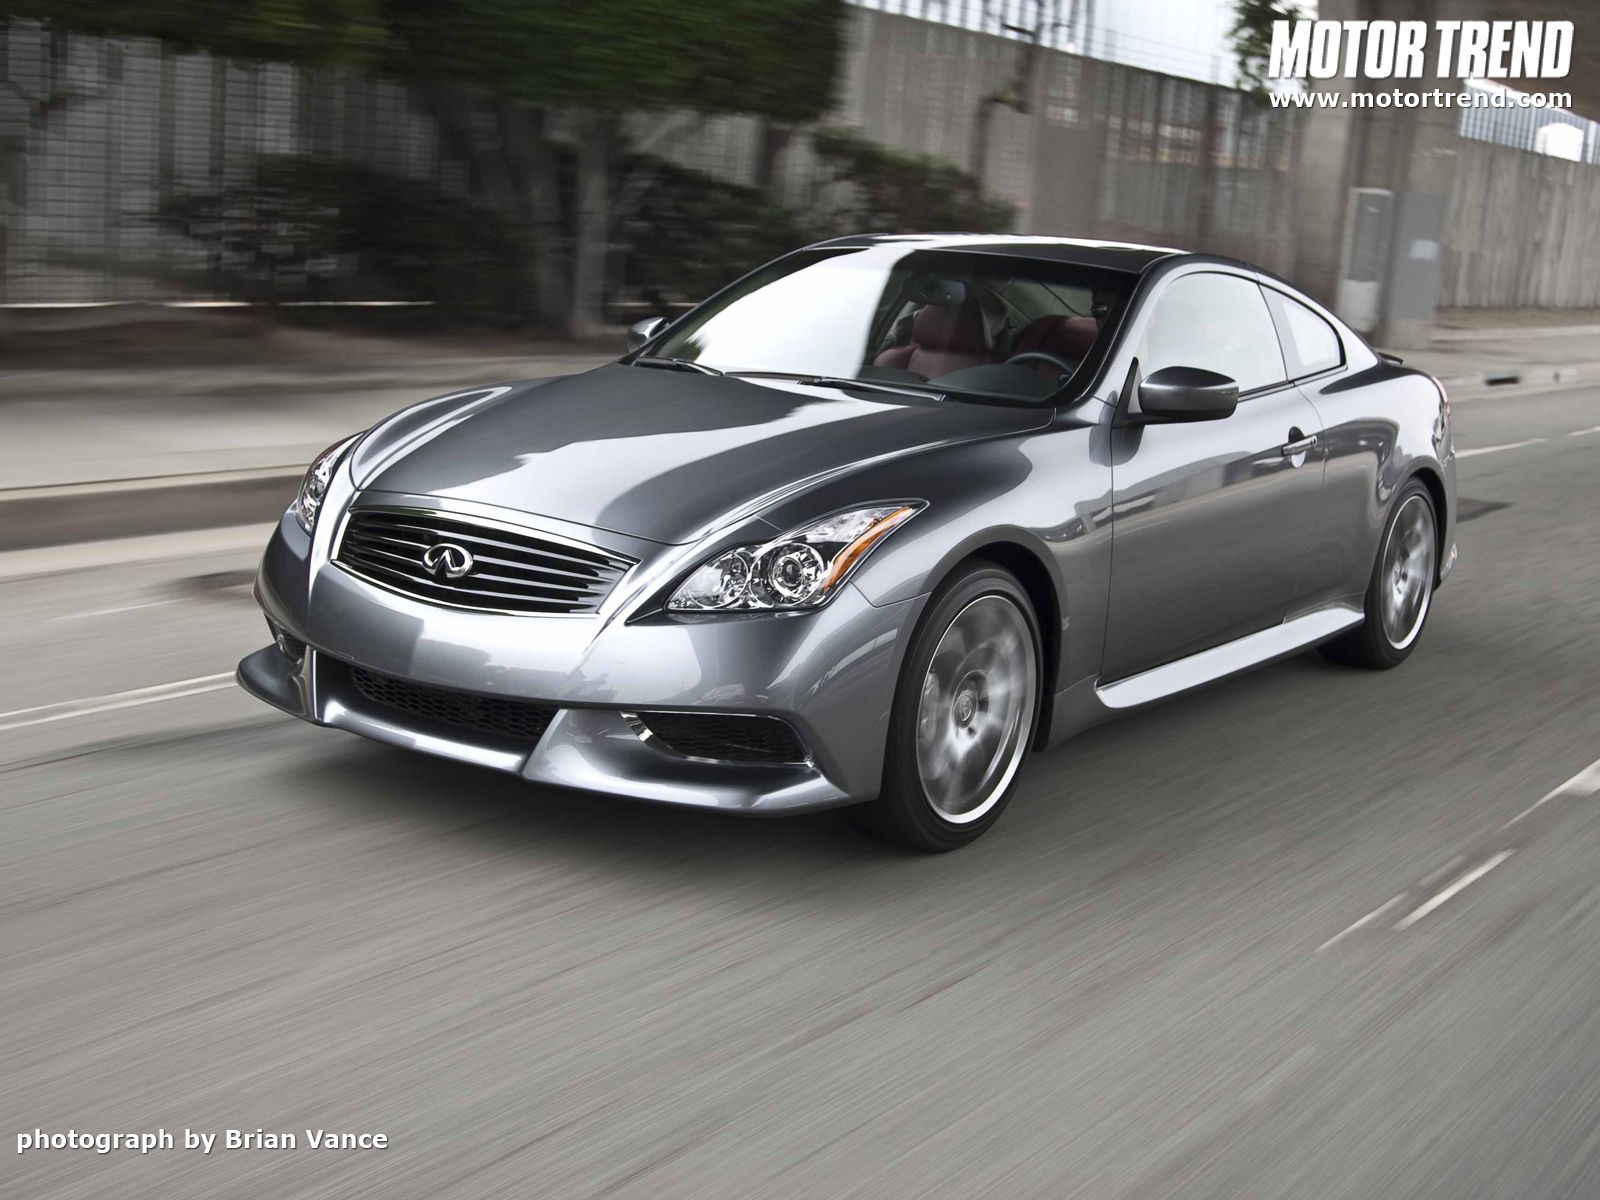 Infiniti G37 Wallpaper Image Amp Pictures Becuo